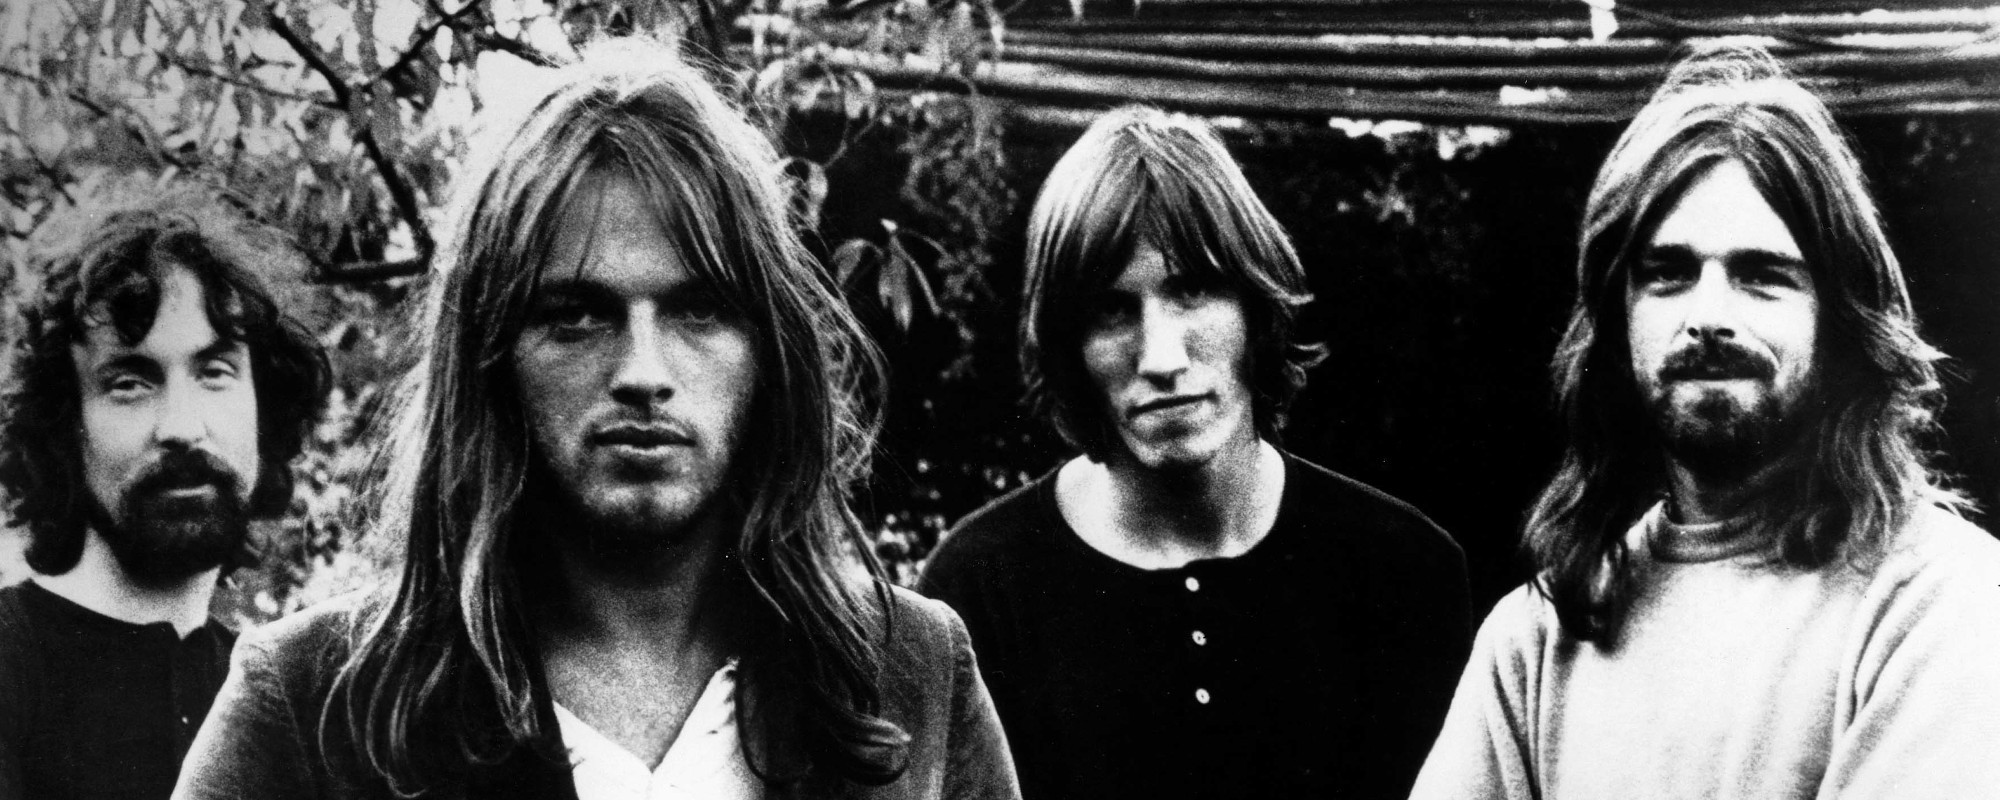 Behind the Album: How Pink Floyd Paved Their Way to the ‘Dark Side’ with ‘Meddle’